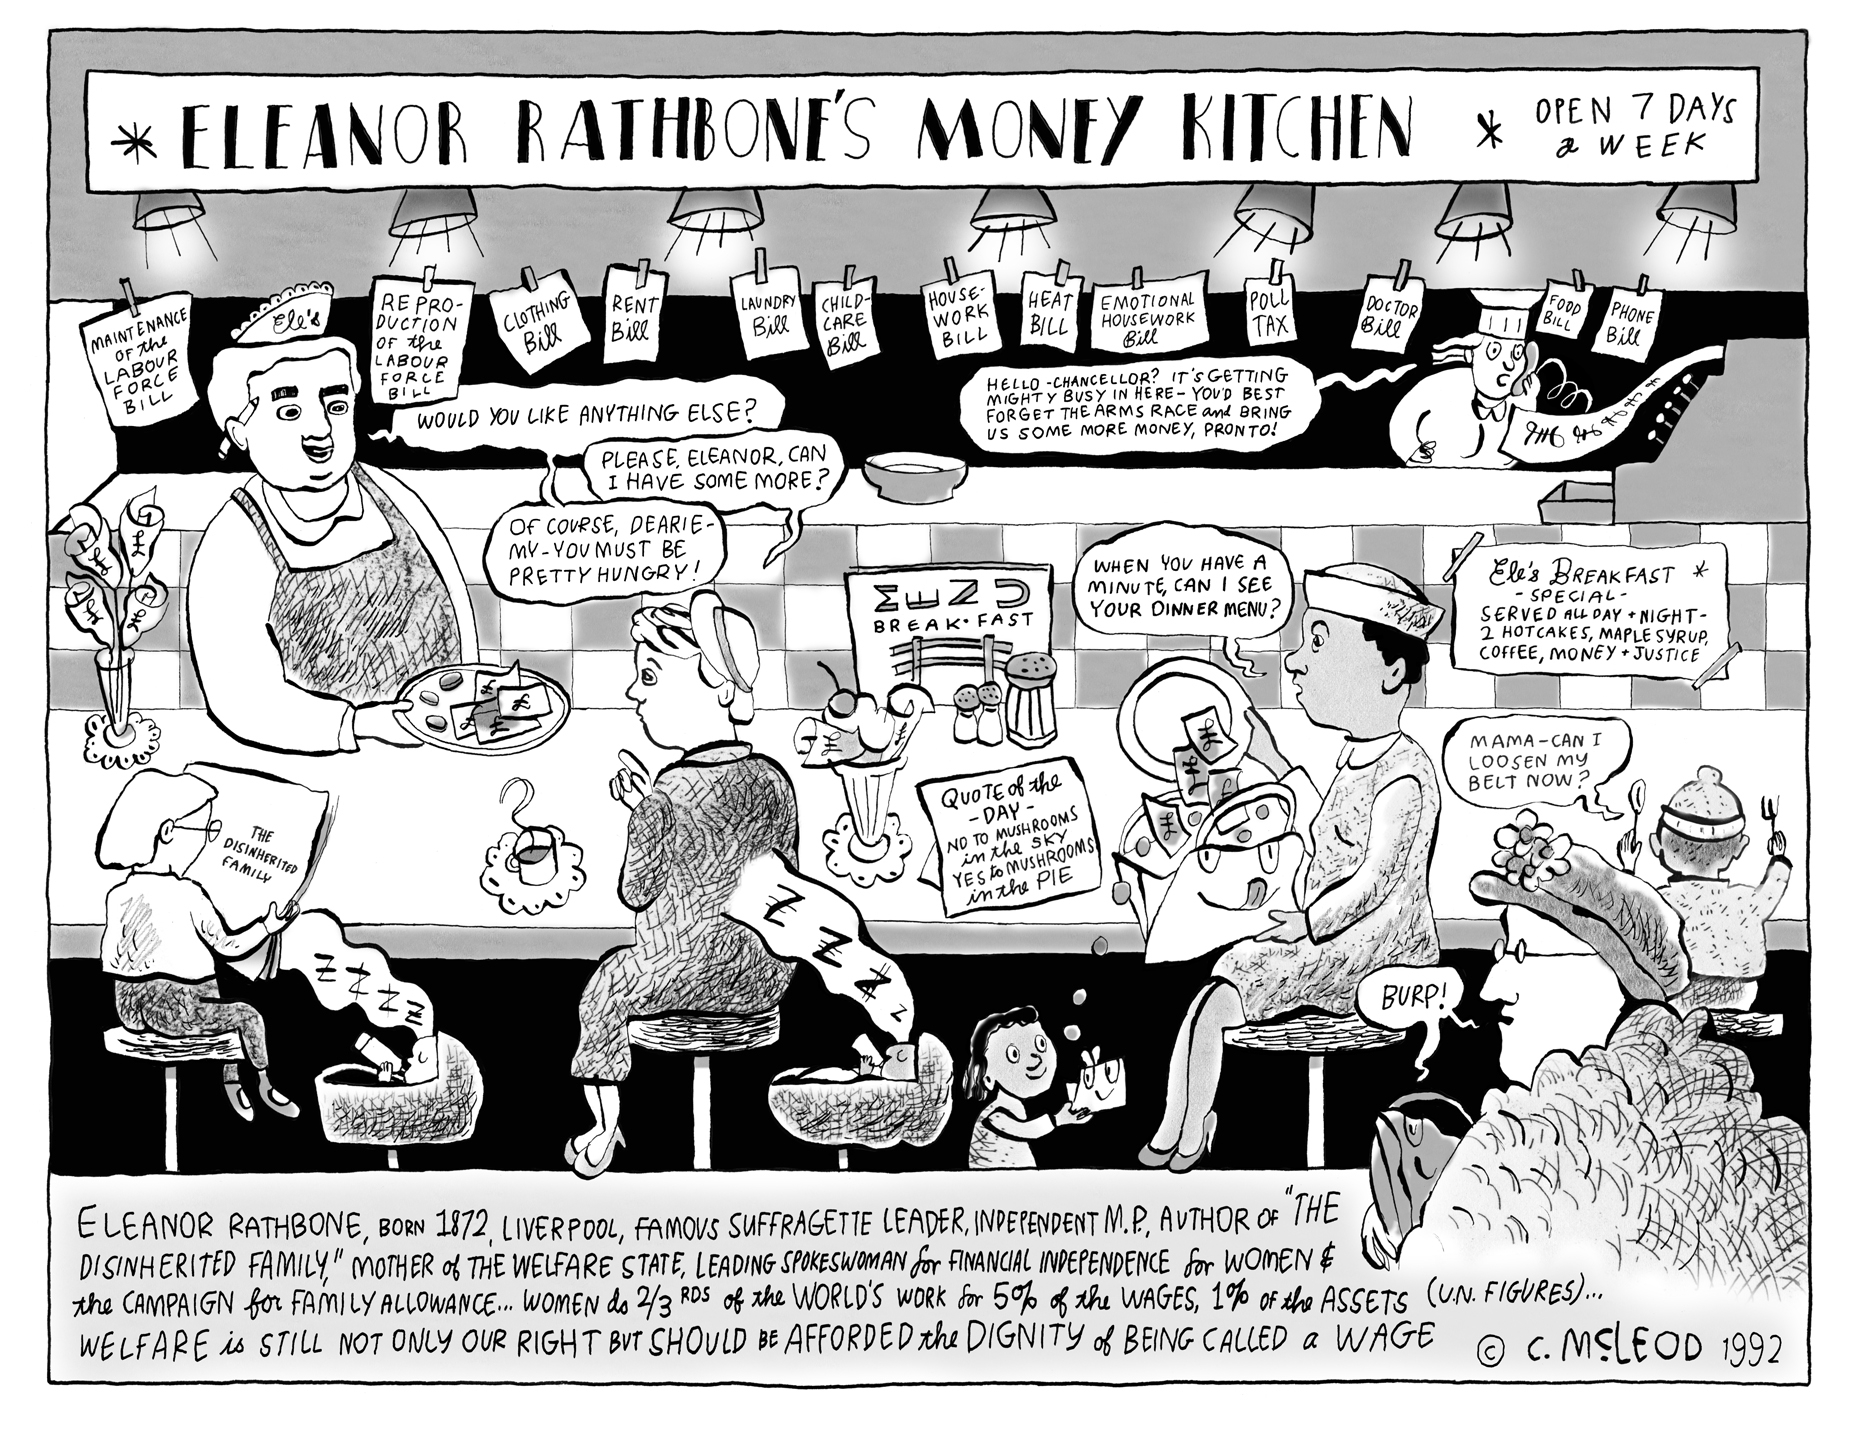   Eleanor Rathbone's Money Kitchen  Famous Women Eating Breakfast and soon to be re-published in Inking Women (Anthology of British Women Cartoonists) 